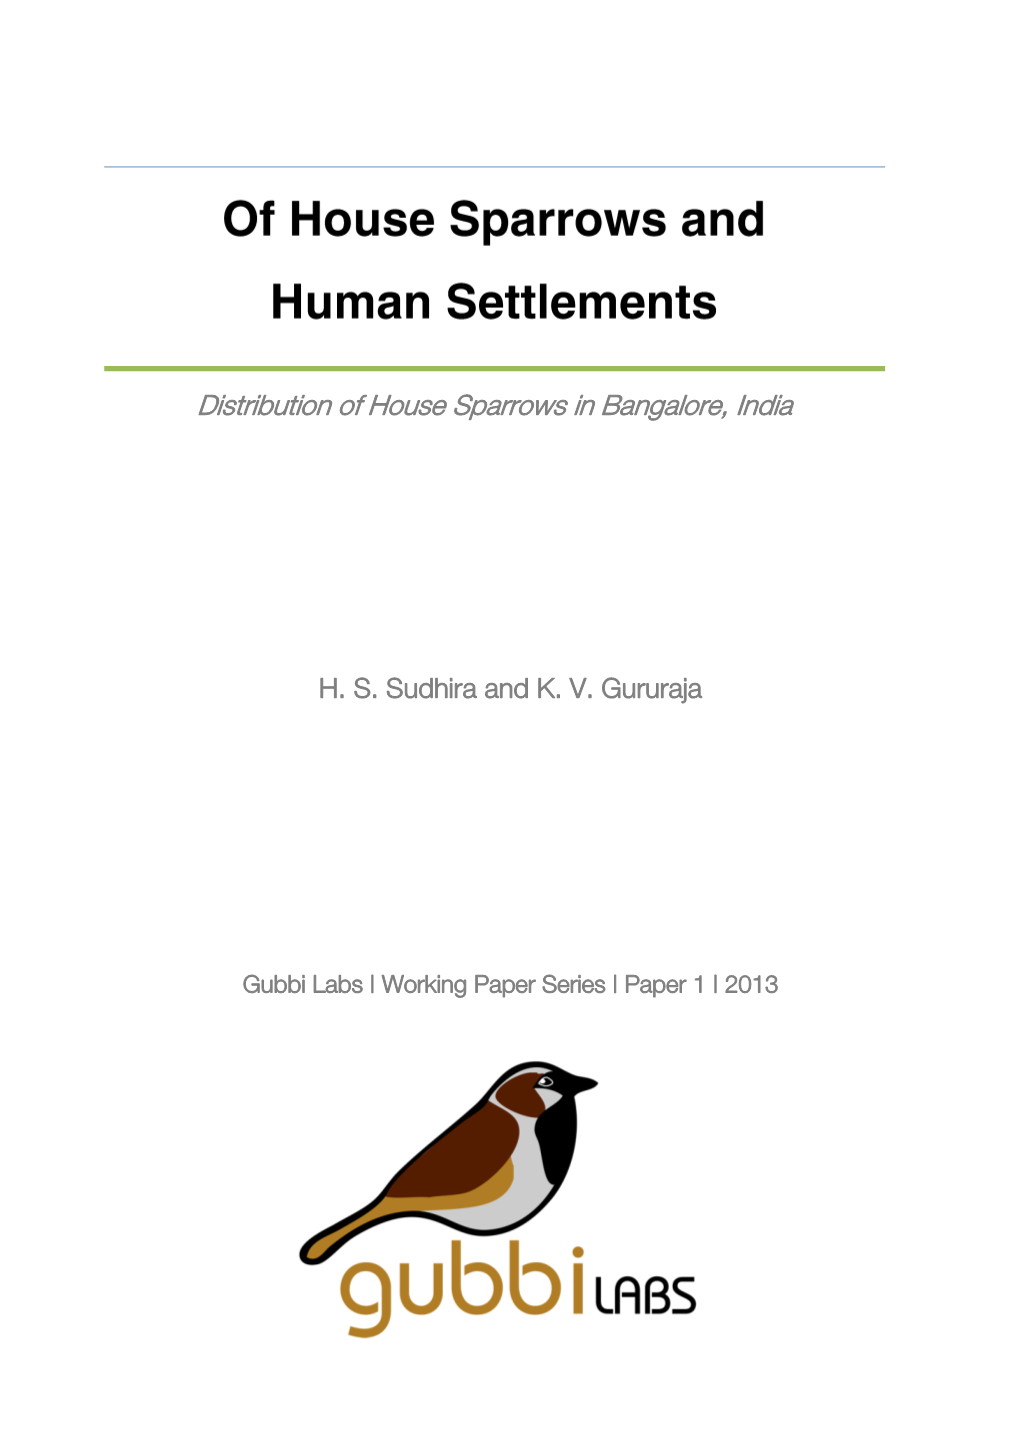 Of House Sparrows and Human Settlements - Distribution of House Sparrows in Bangalore, India